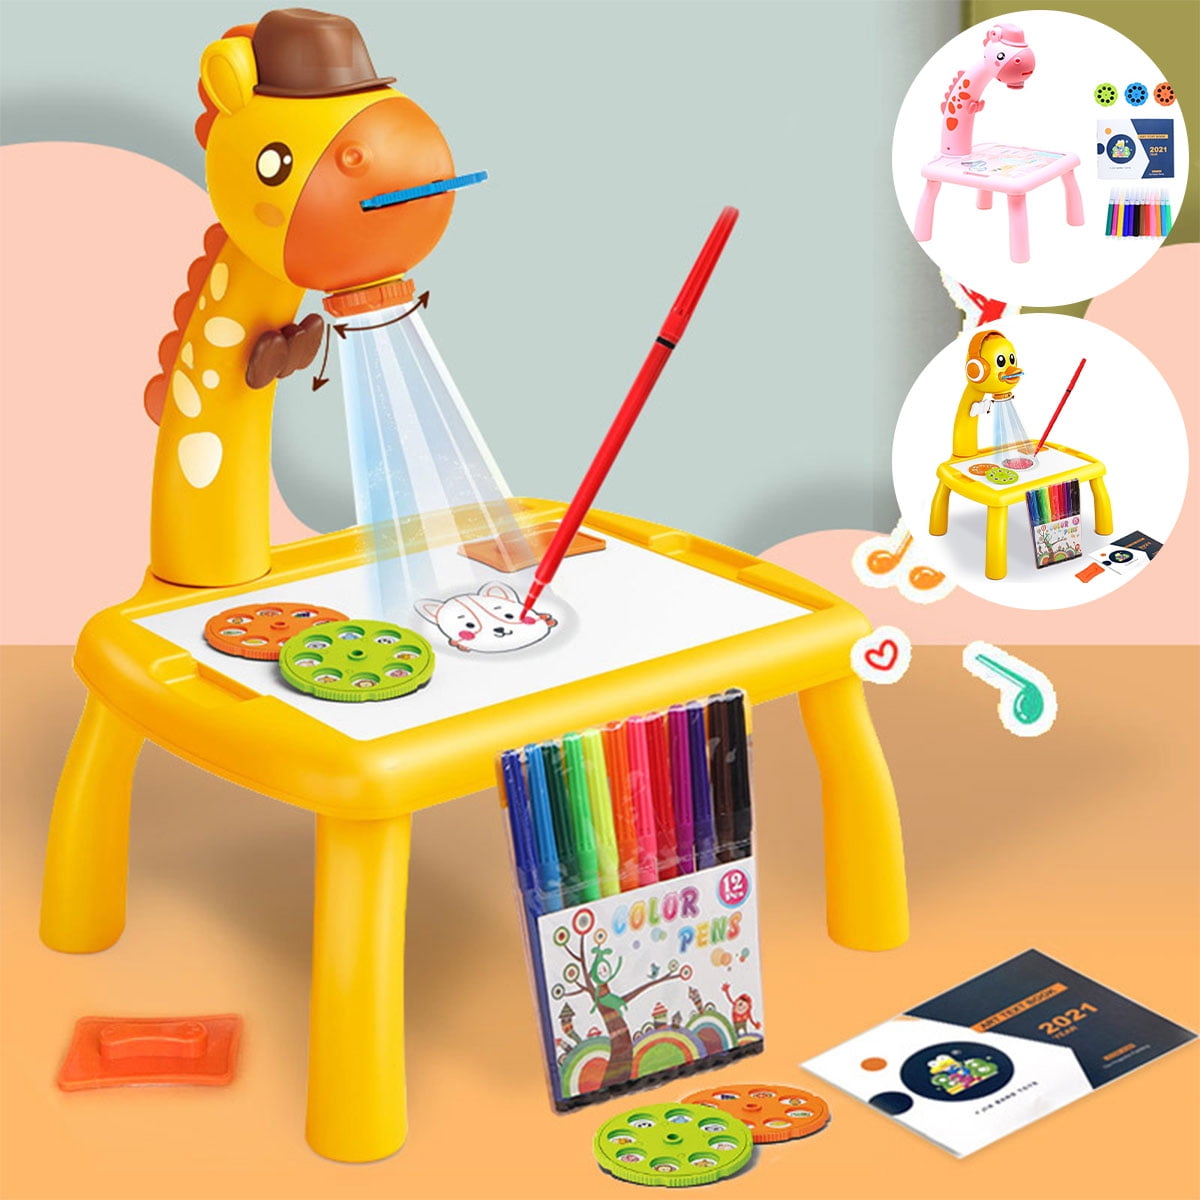 kipod Wooden Art Tracing Projector Drawing Kit for Kids with Washi